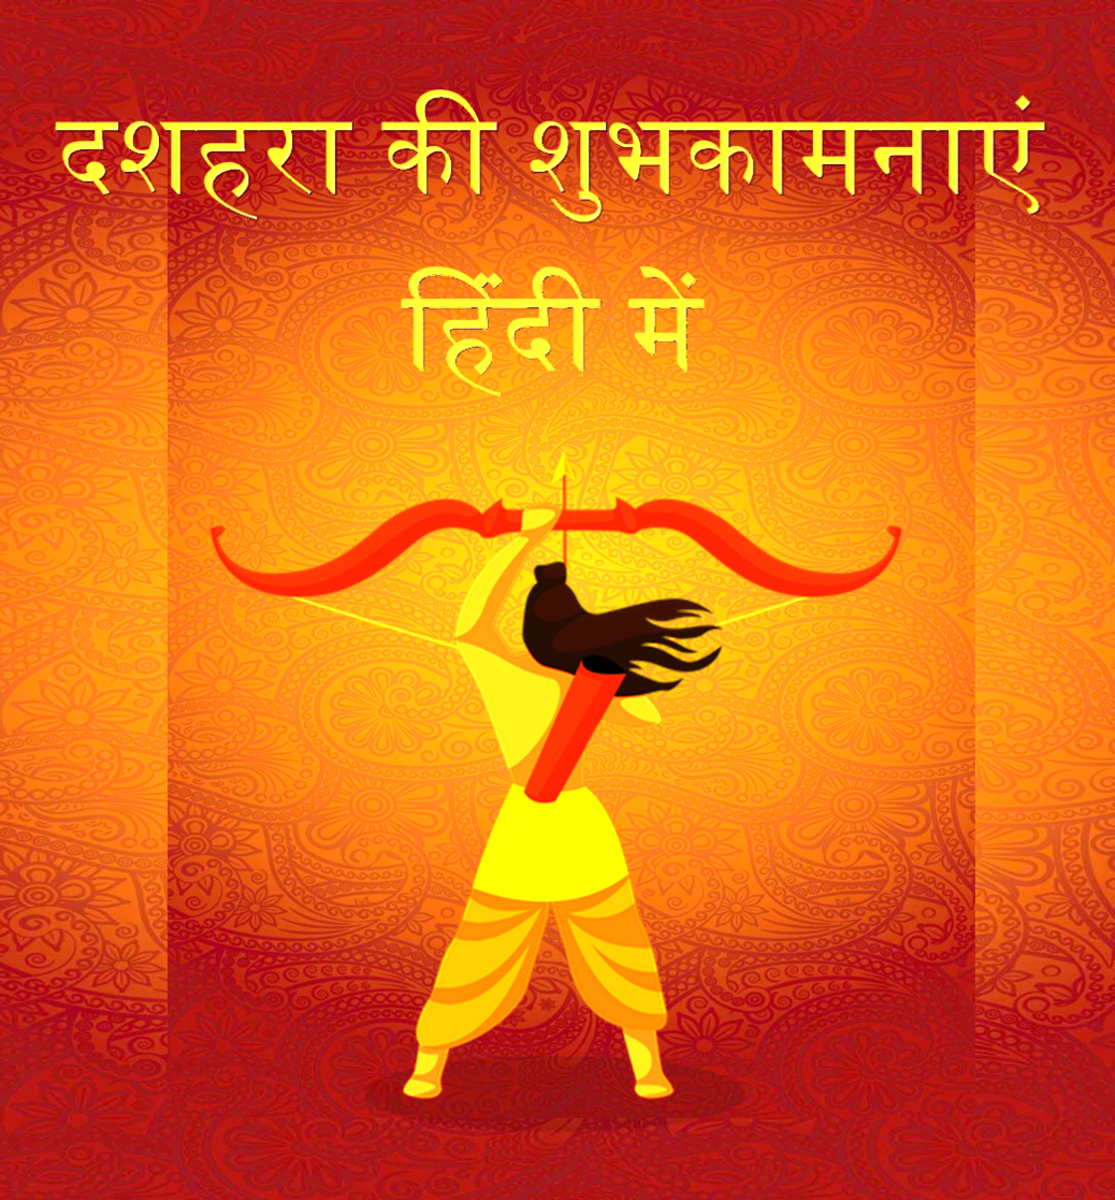 Dussehra (Dasara) Wishes and Greetings in the Hindi Language